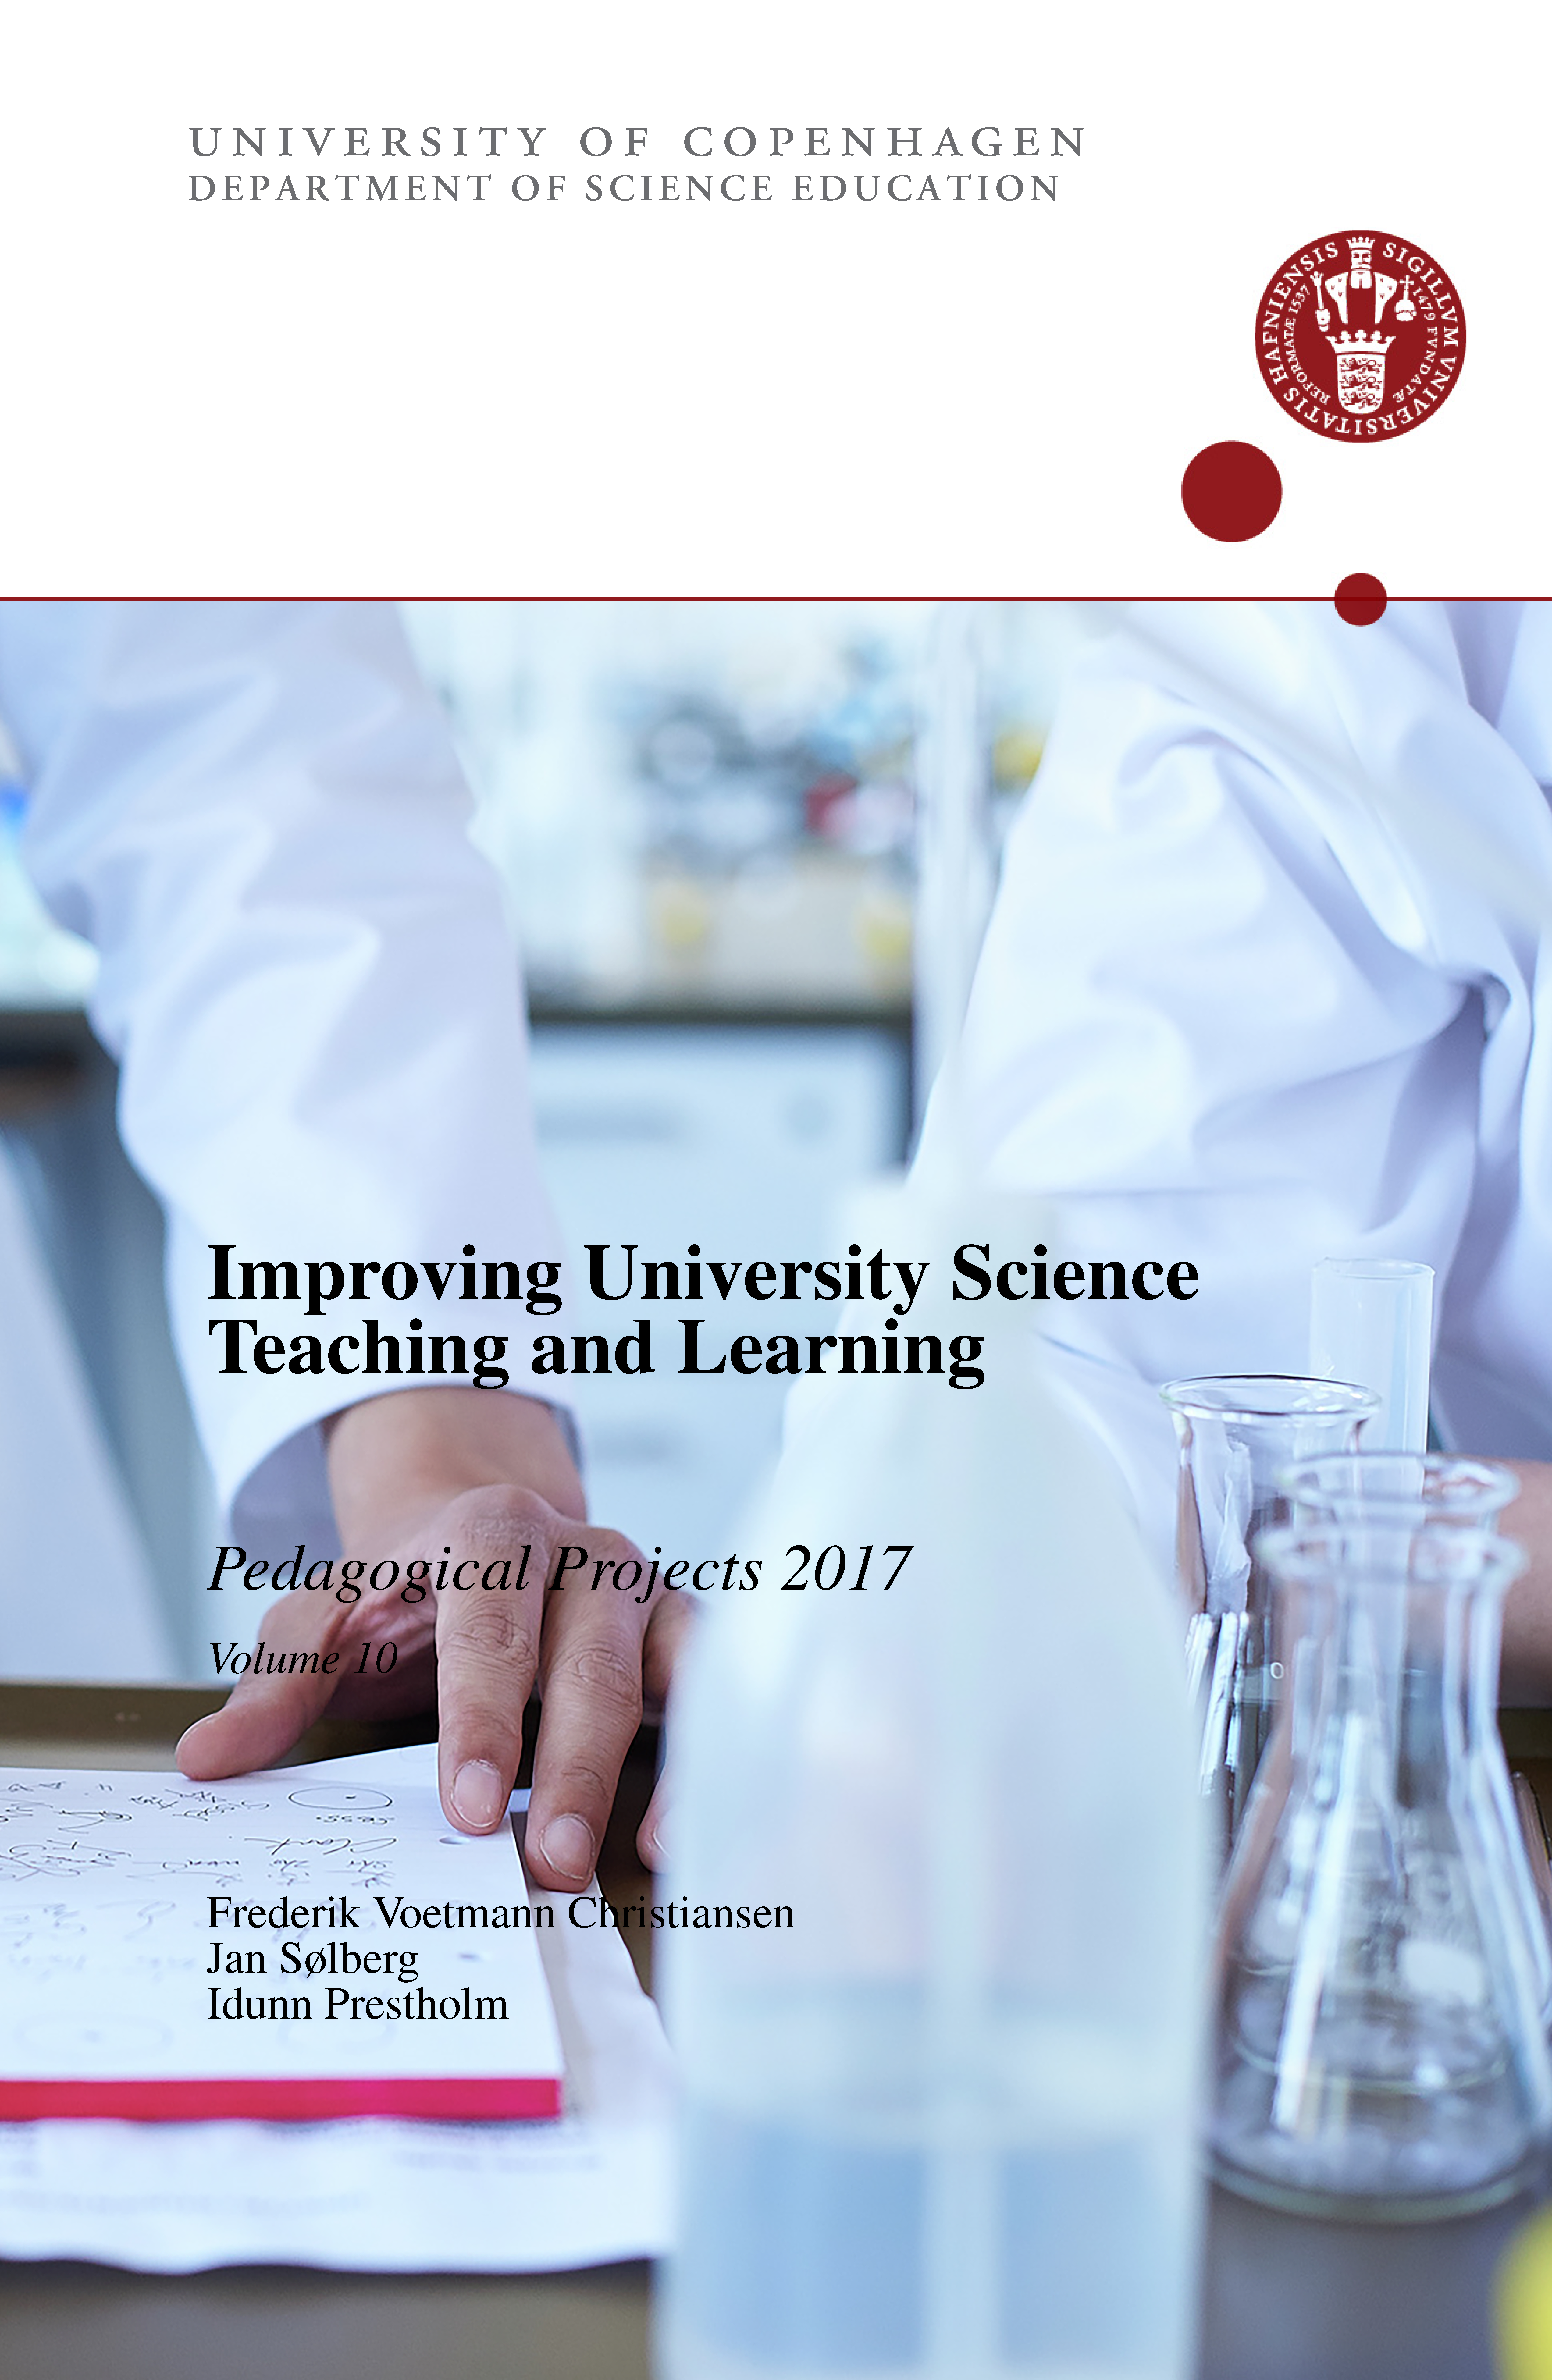 					Se Årg. 10 Nr. 1 (2017):  Improving University Science Teaching and Learning - Pedagogical Projects 2017
				